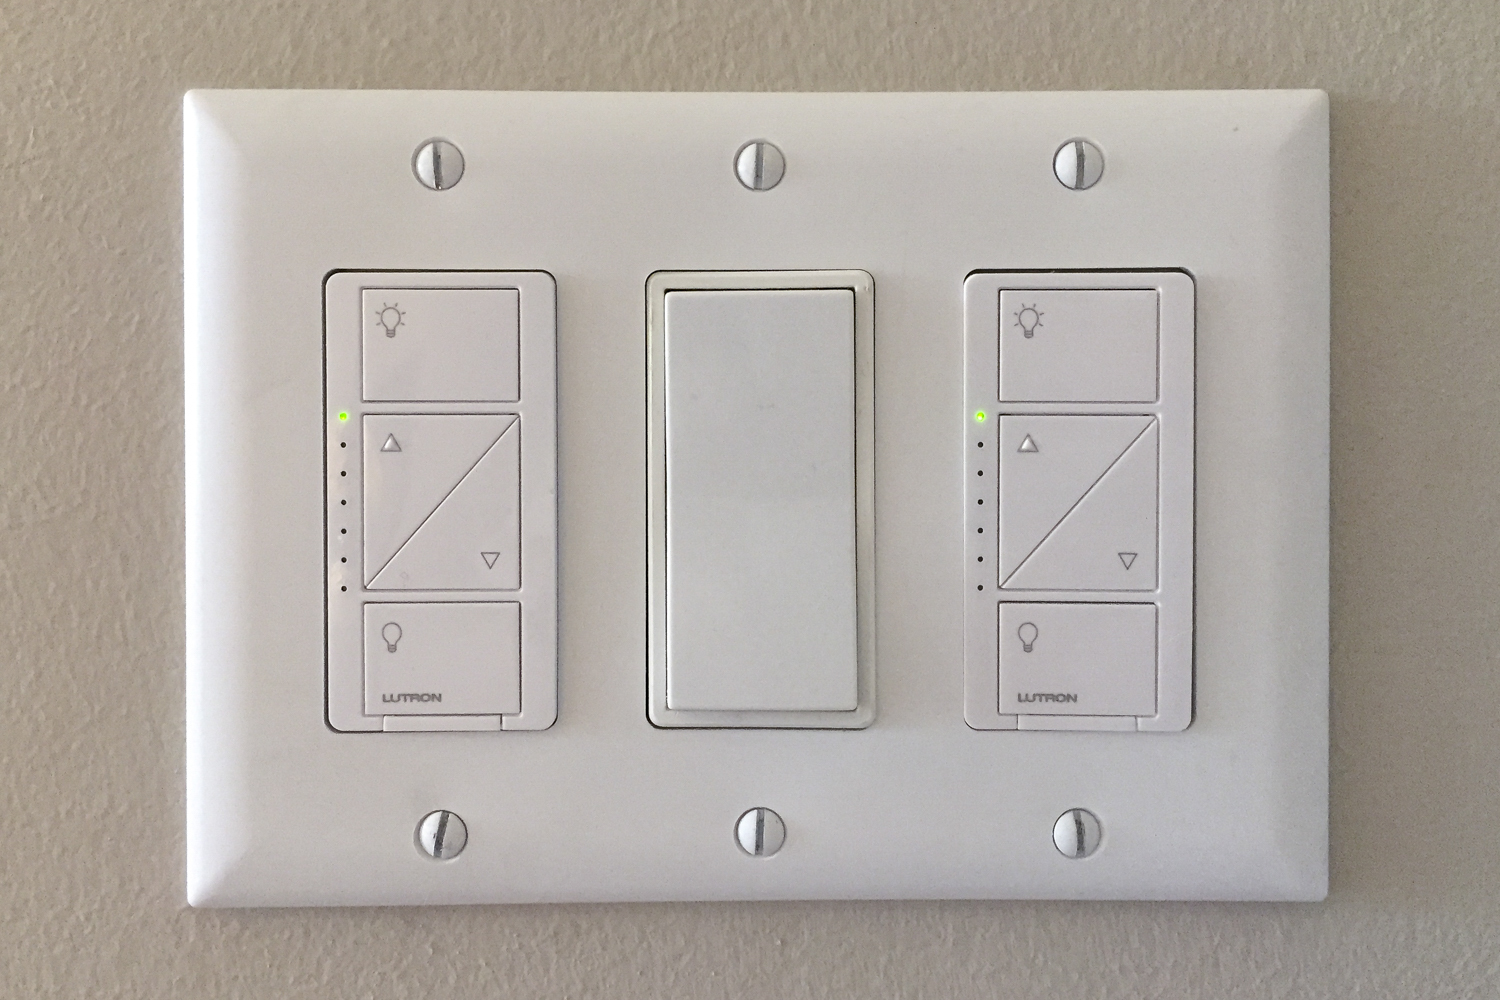 Lutron Fan Control Review: Should You Buy One? | Digital Trends